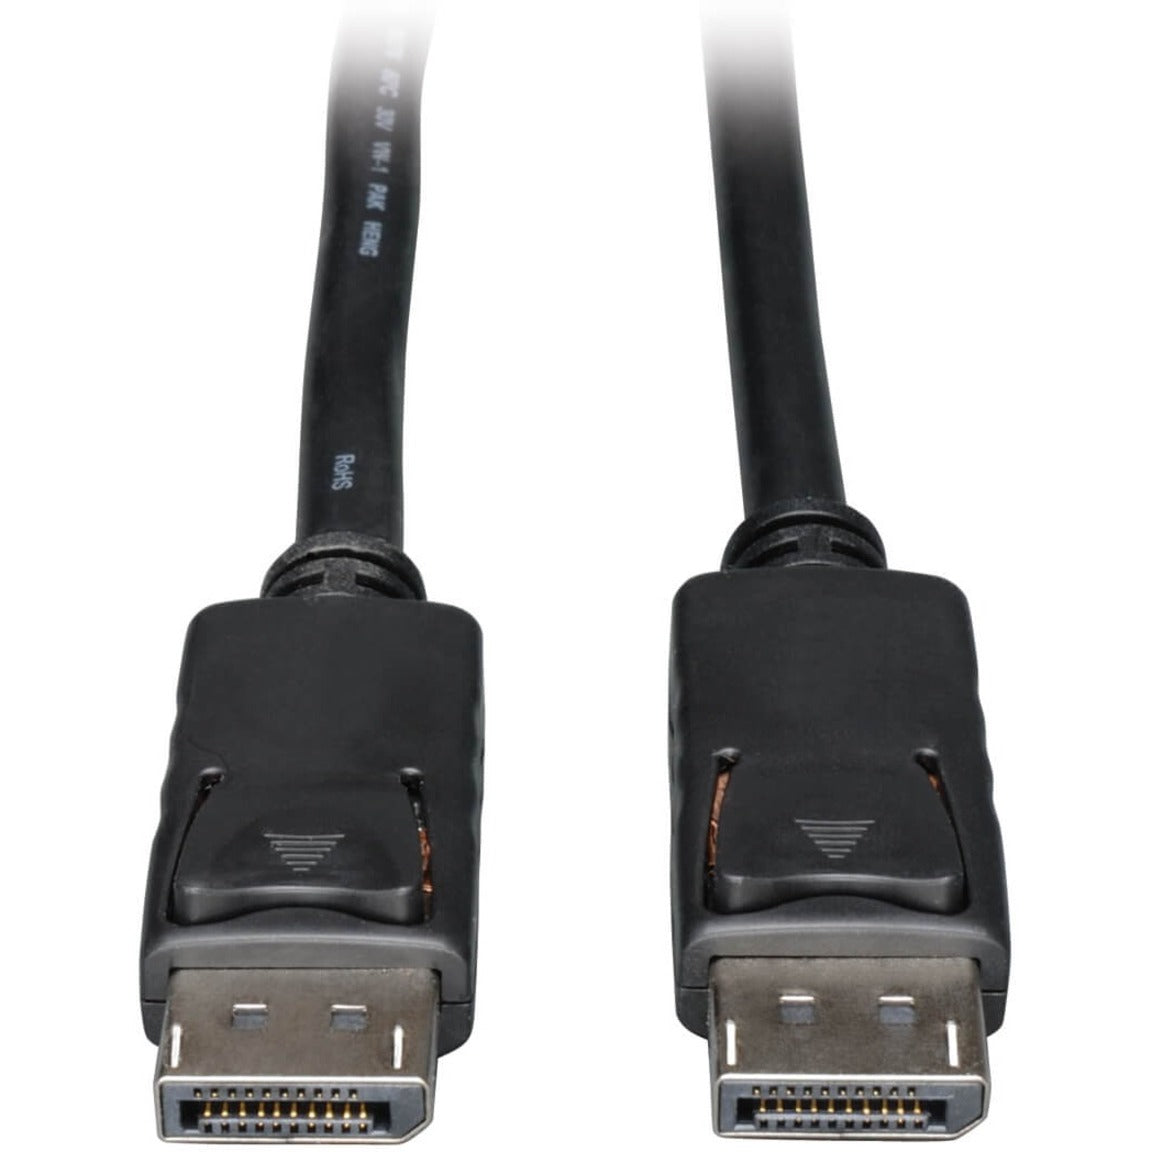 Tripp Lite P580-030 DisplayPort Cable with Latches (M/M) 30-ft, High-Quality Audio/Video Transmission